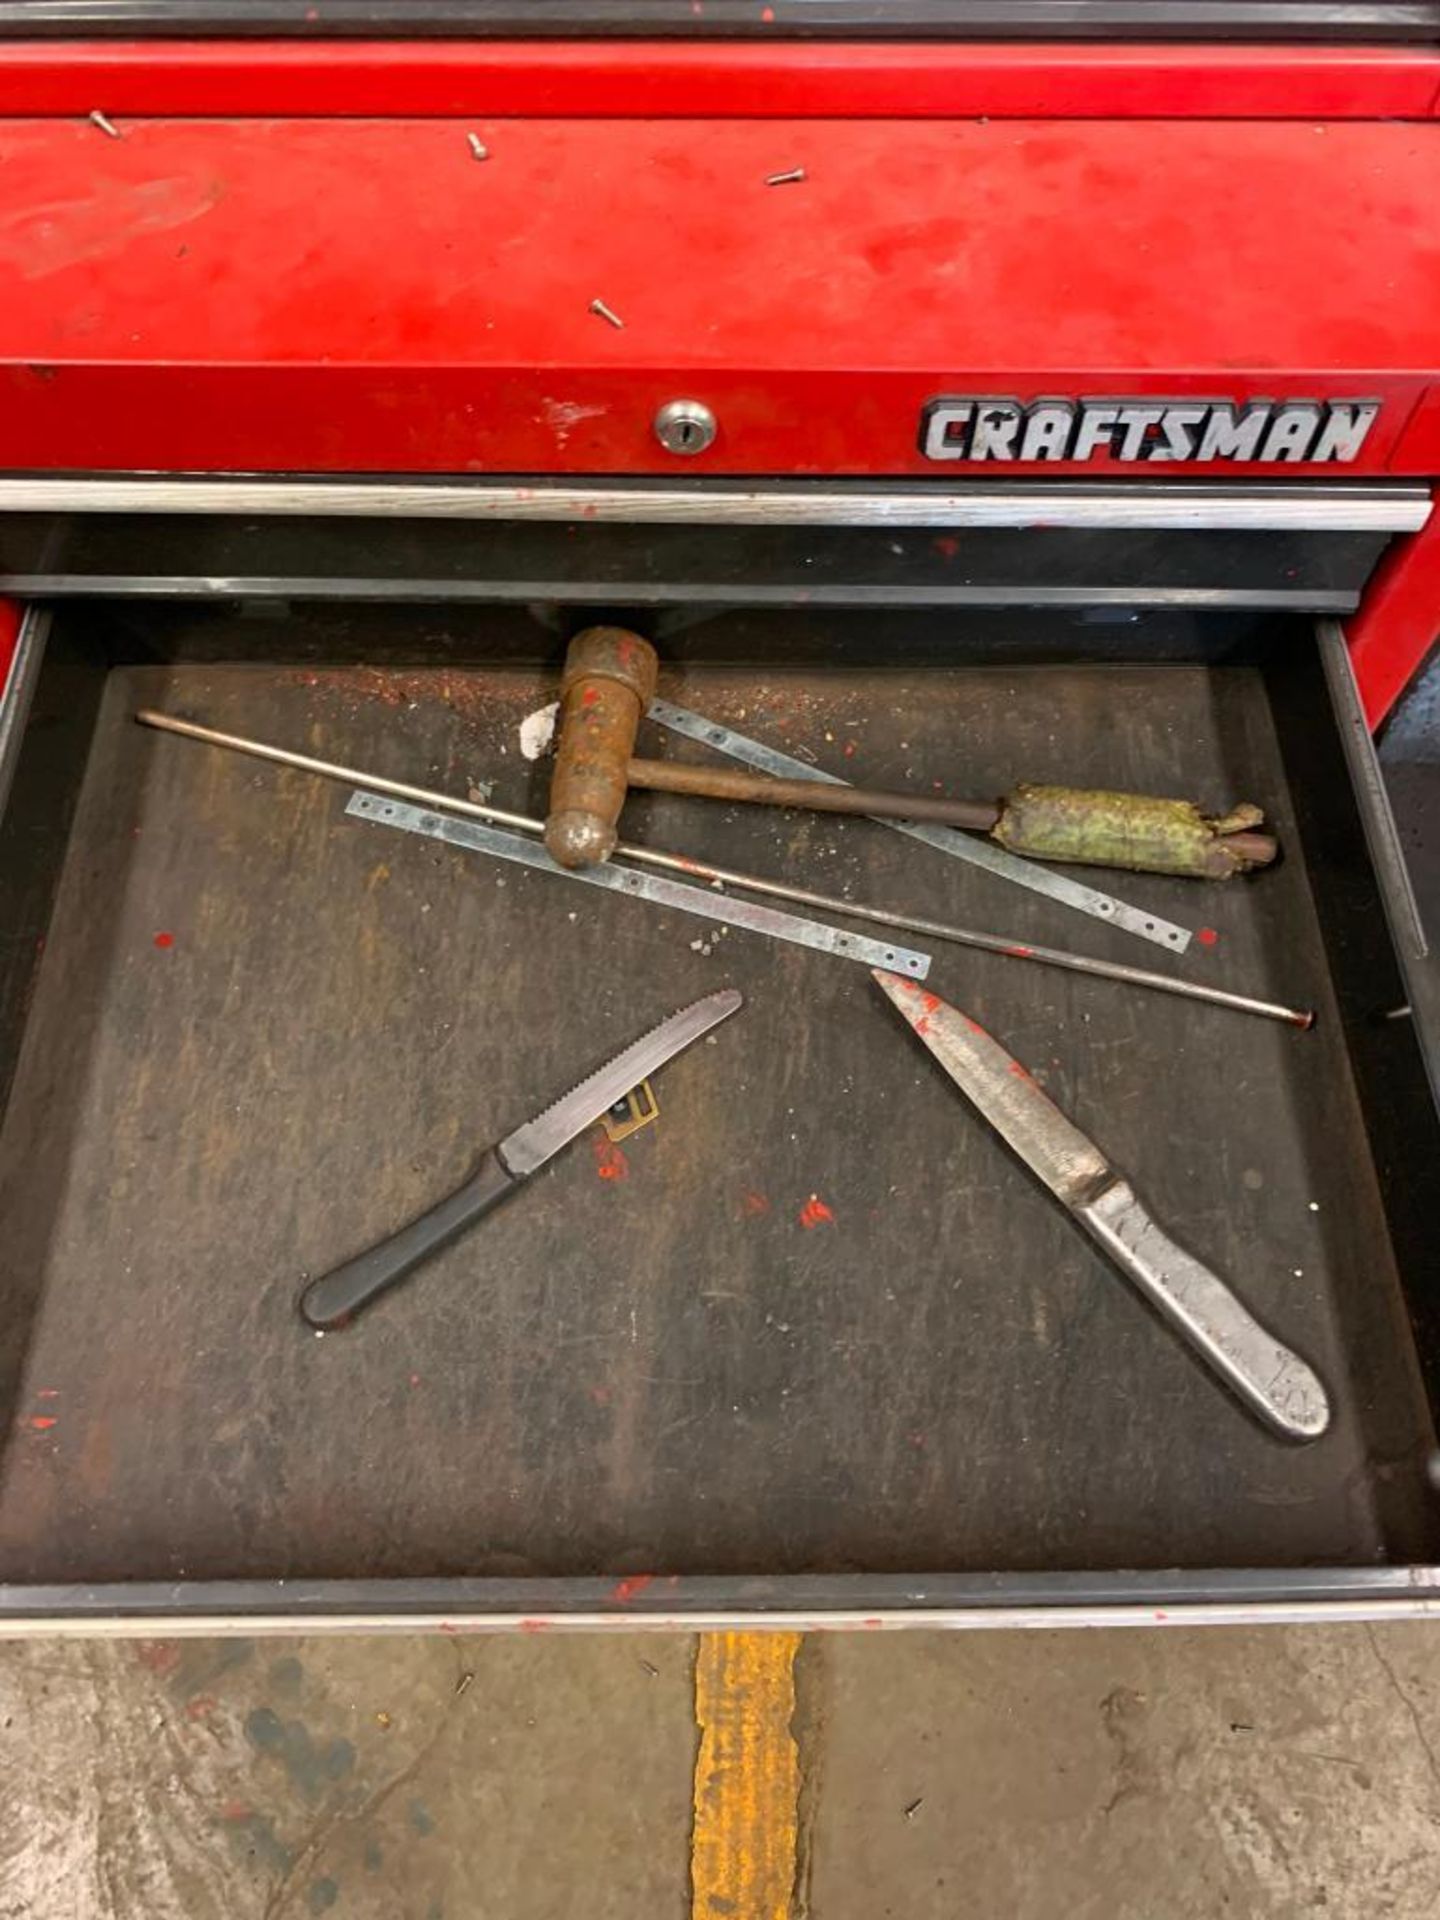 Craftsman Tool Chest w/ Tool Content - Image 4 of 6